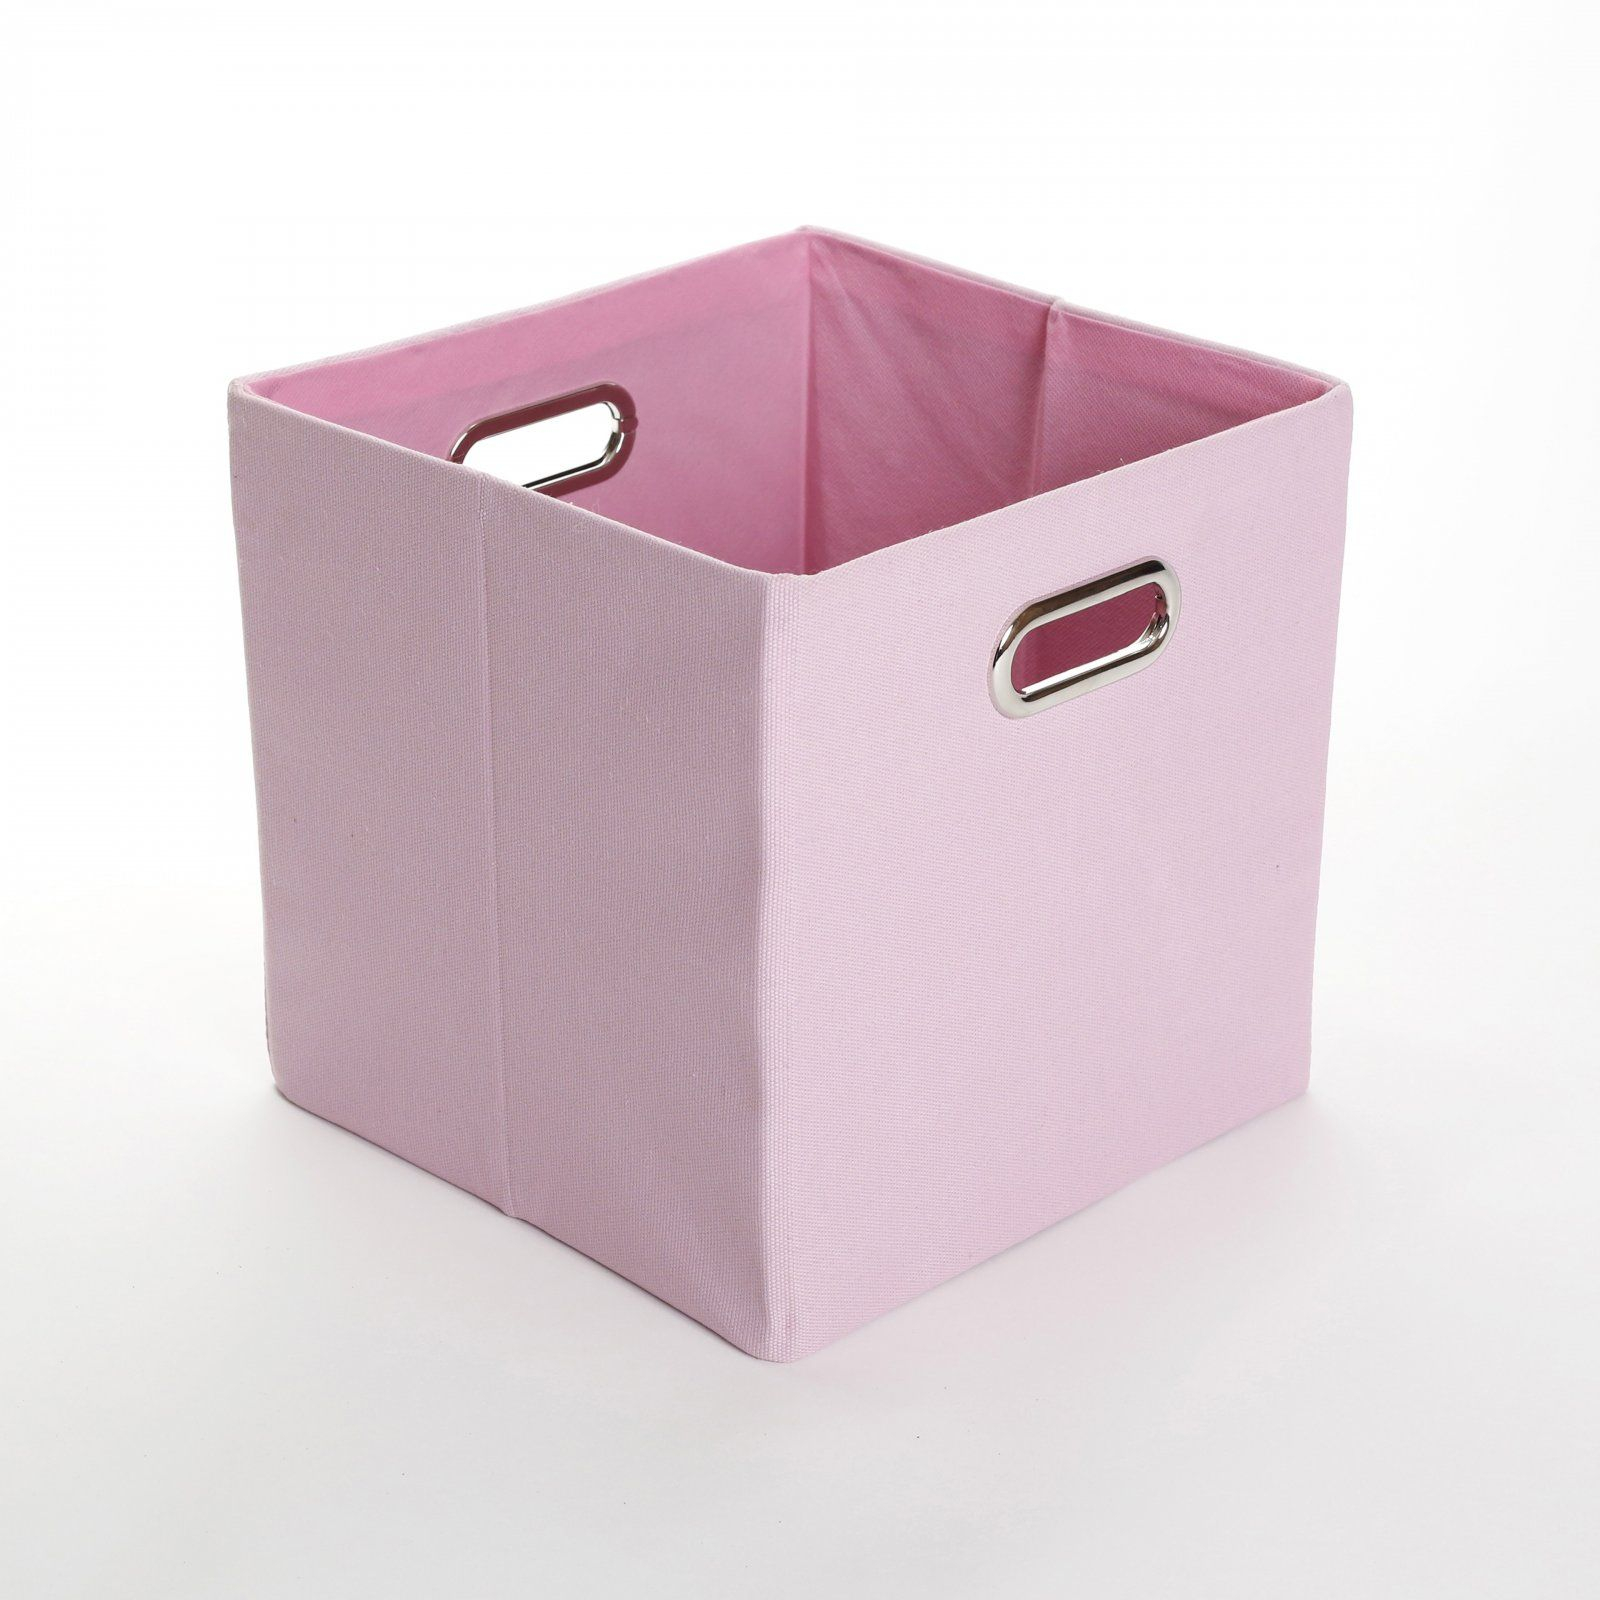 Chic Interior Decor With Canvas Cloth Storage Bins Giggle Dots intended for size 1600 X 1600